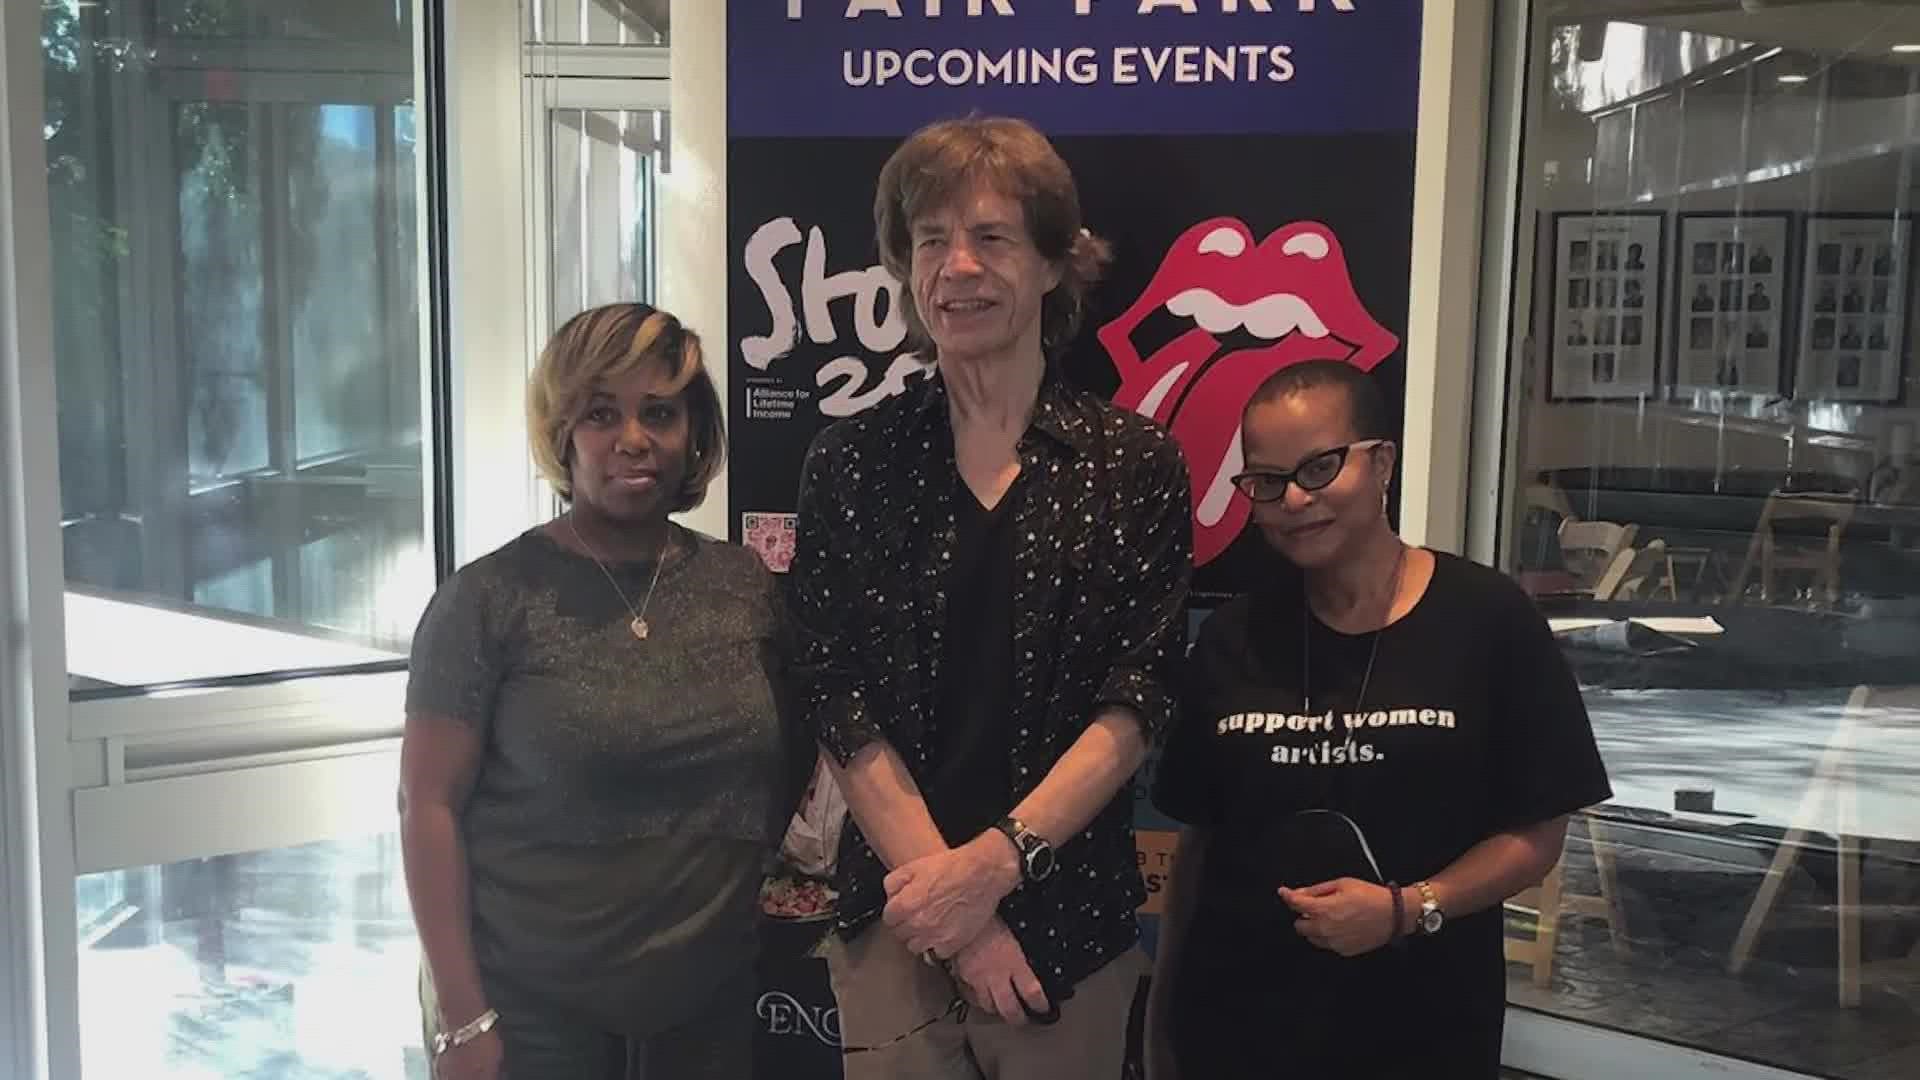 "... I let out a high-pitched squeal and jumped straight up in the air," said Jennifer Monet Cowley, when she met Mick Jagger.